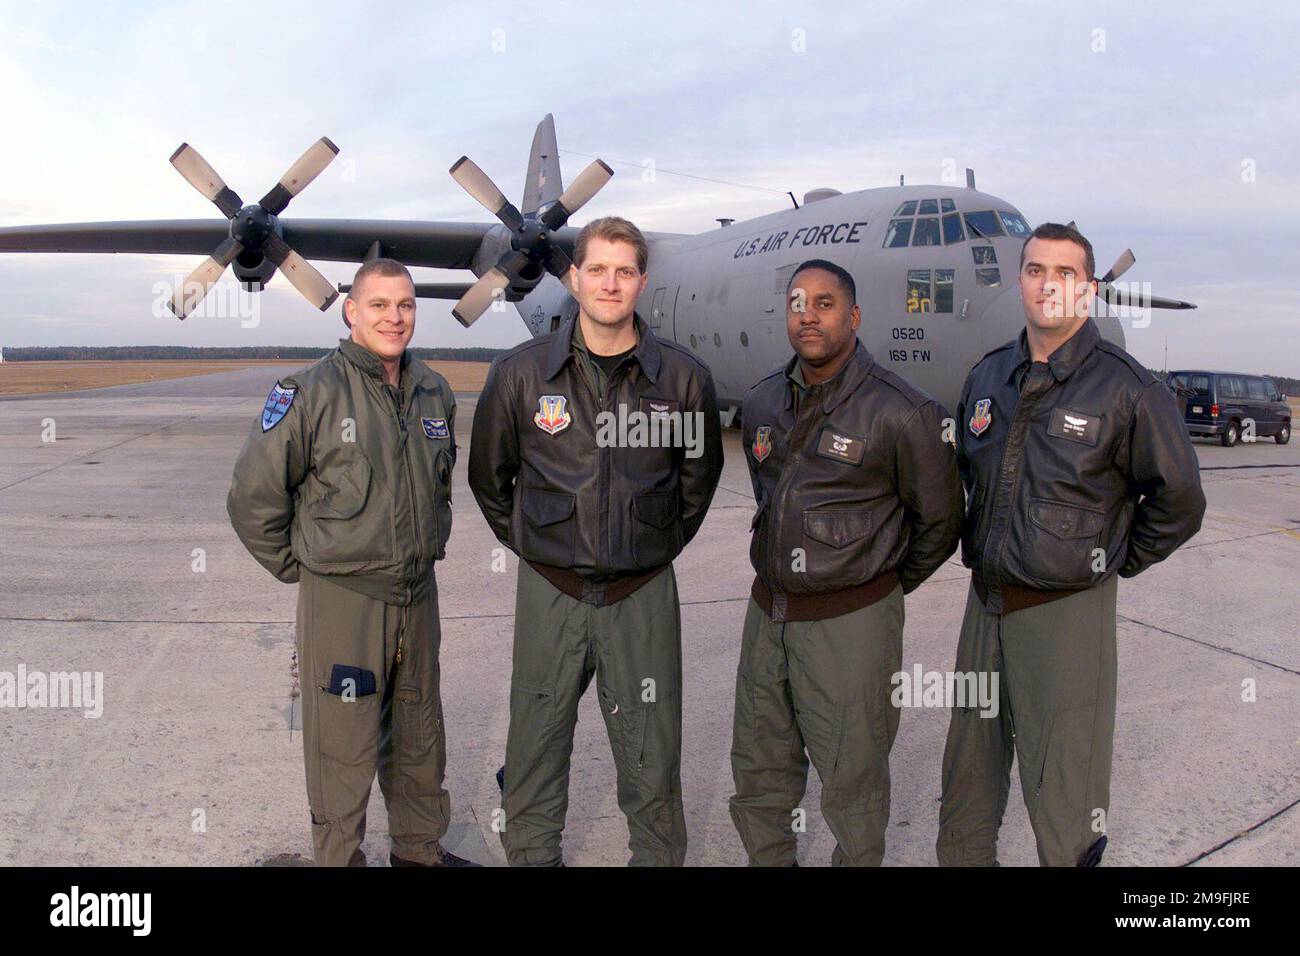 The flight crew of a C-130E Hercules aircraft from the 157th Fighter Wing, South Carolina Air National Guard, pose for a photograph in front of the aircraft. (L to R) Technical Sergeant James C. McMillian, Flight Engineer, Captain Matthew Weber, Pilot, Major David Gray, Pilot, and Technical Sergeant Brian Duncan, Loadmaster. State: South Carolina (SC) Country: United States Of America (USA) Stock Photo